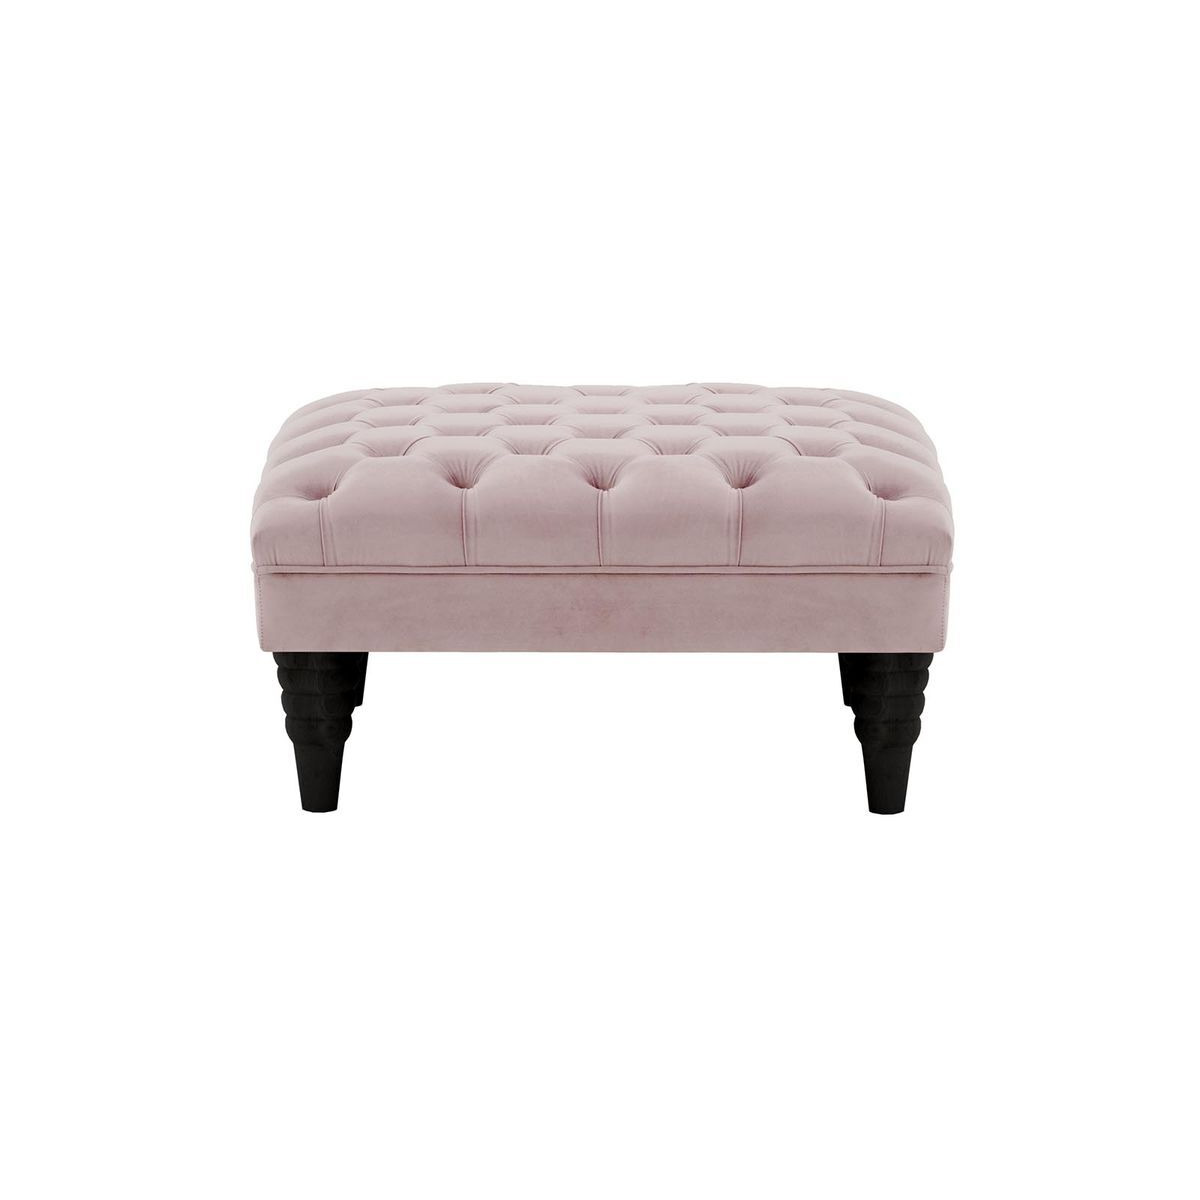 Chester Max Footstool, lilac, Leg colour: black - image 1